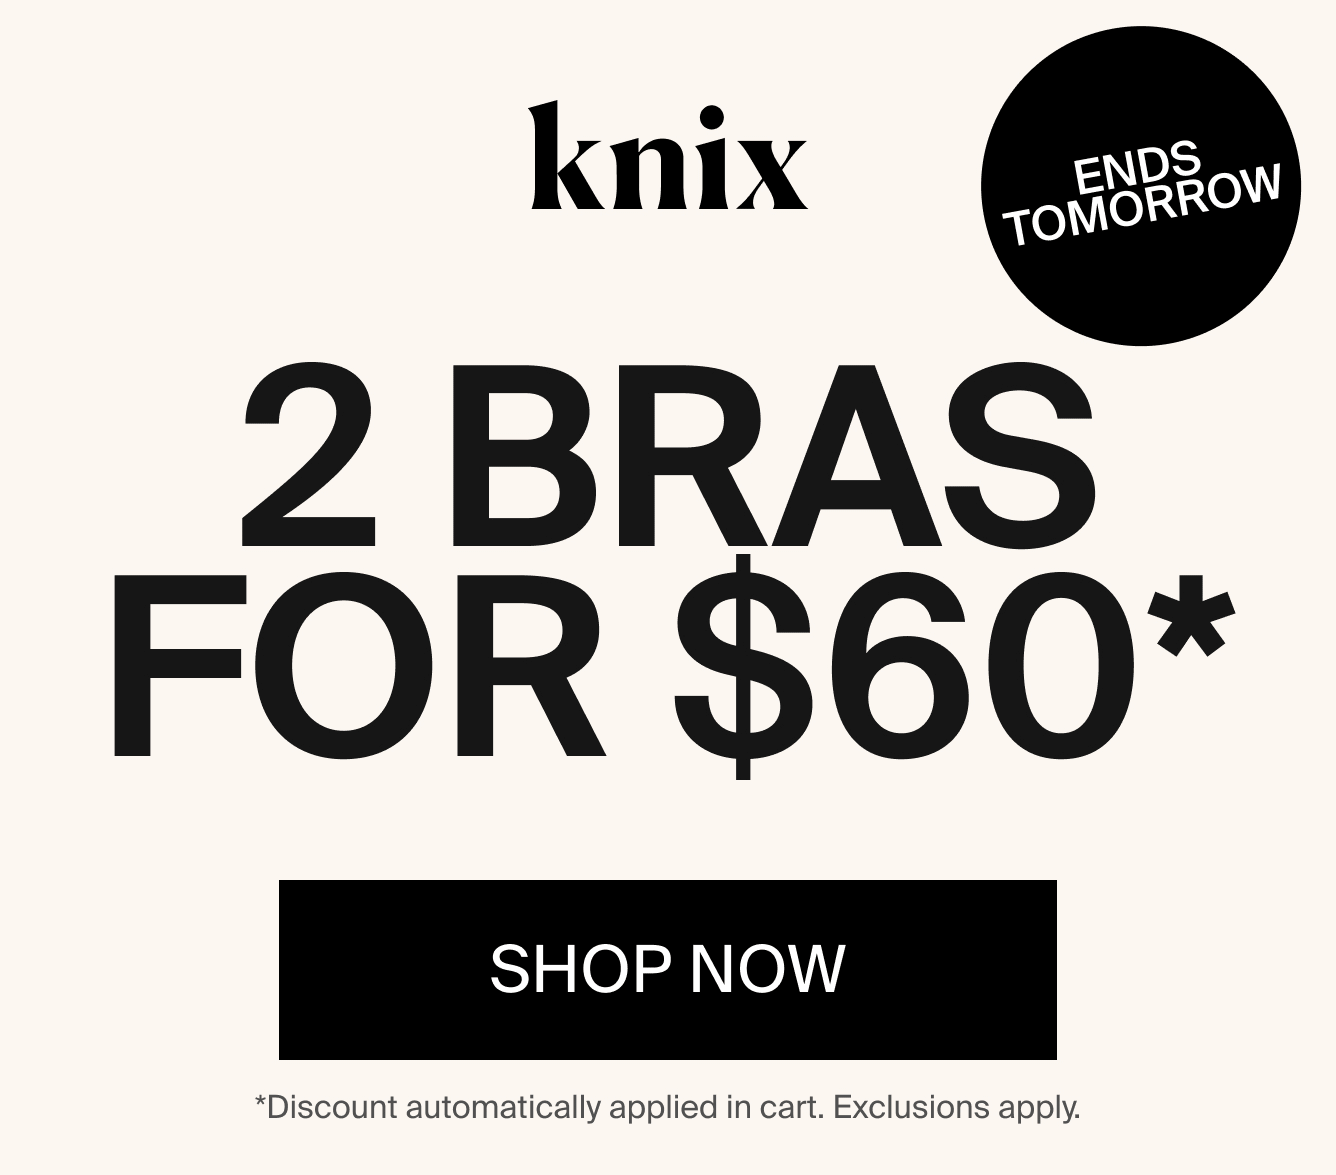 Knix: ENDS TOMORROW. 2 Bras for \\$60*. Bra Blowout. SHOP NOW. *Discounts automatically applied in cart. Exclusions apply.